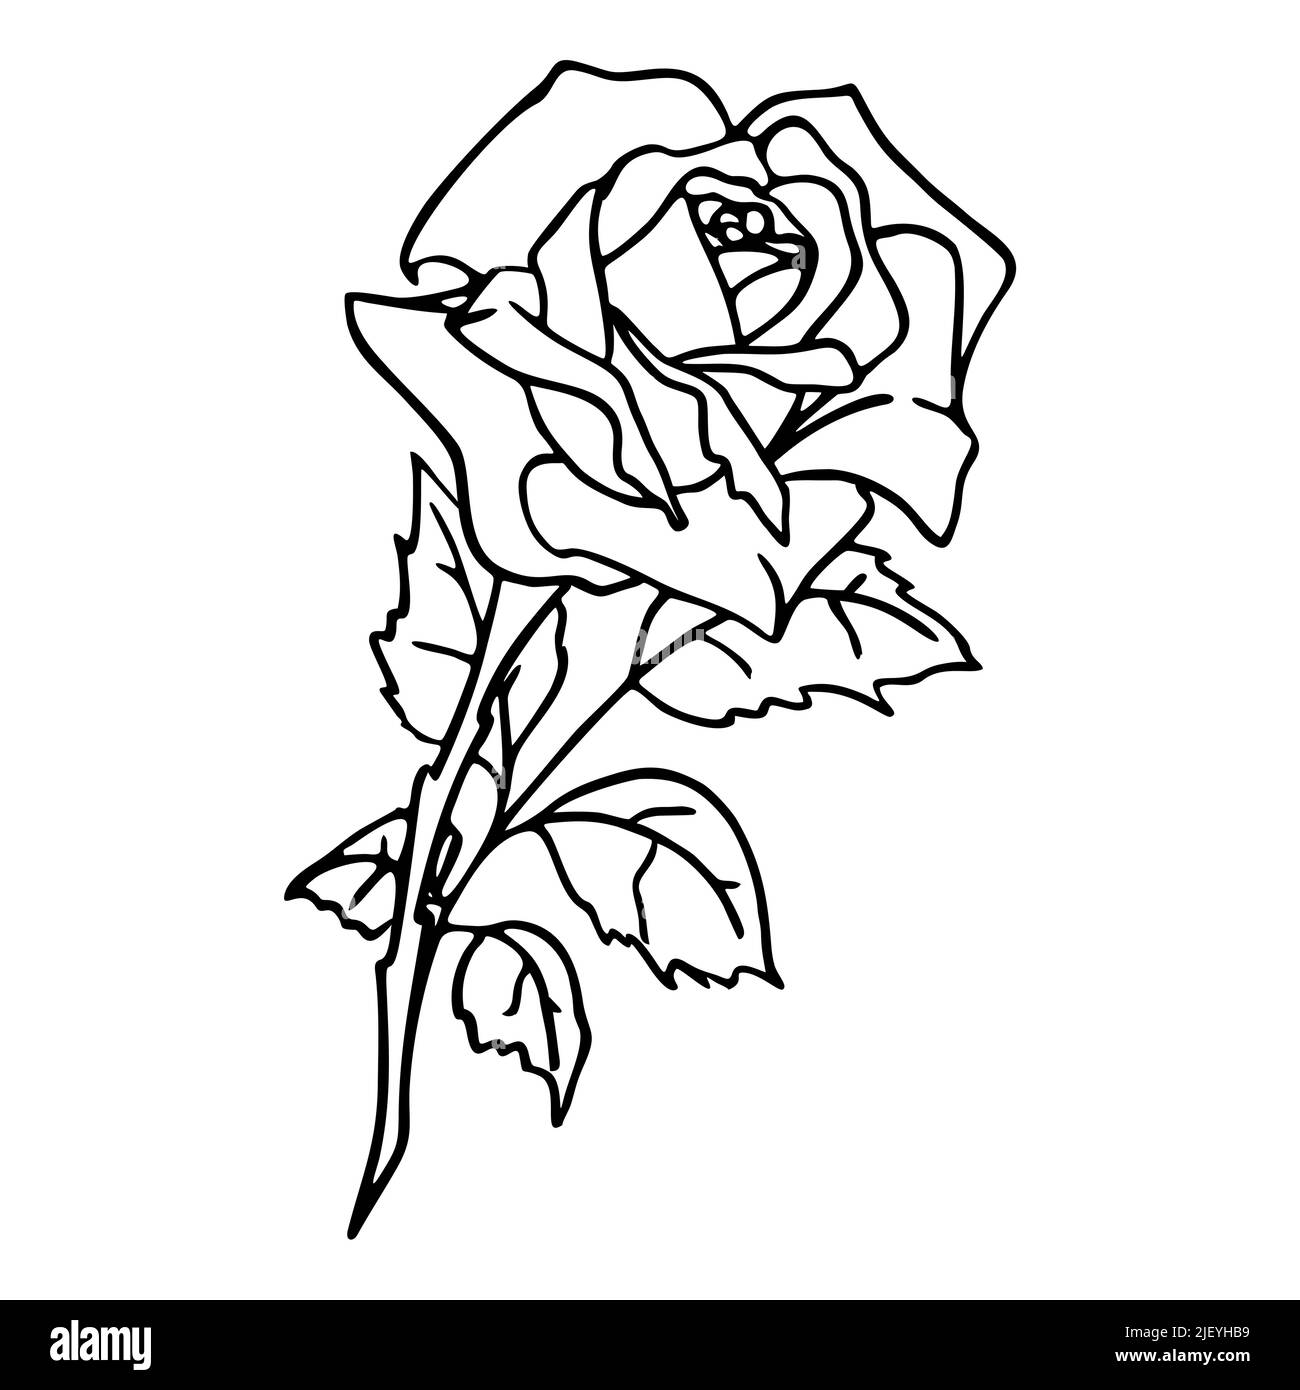 contour black image of a rose on a white background, drawing, graphics, design Stock Vector